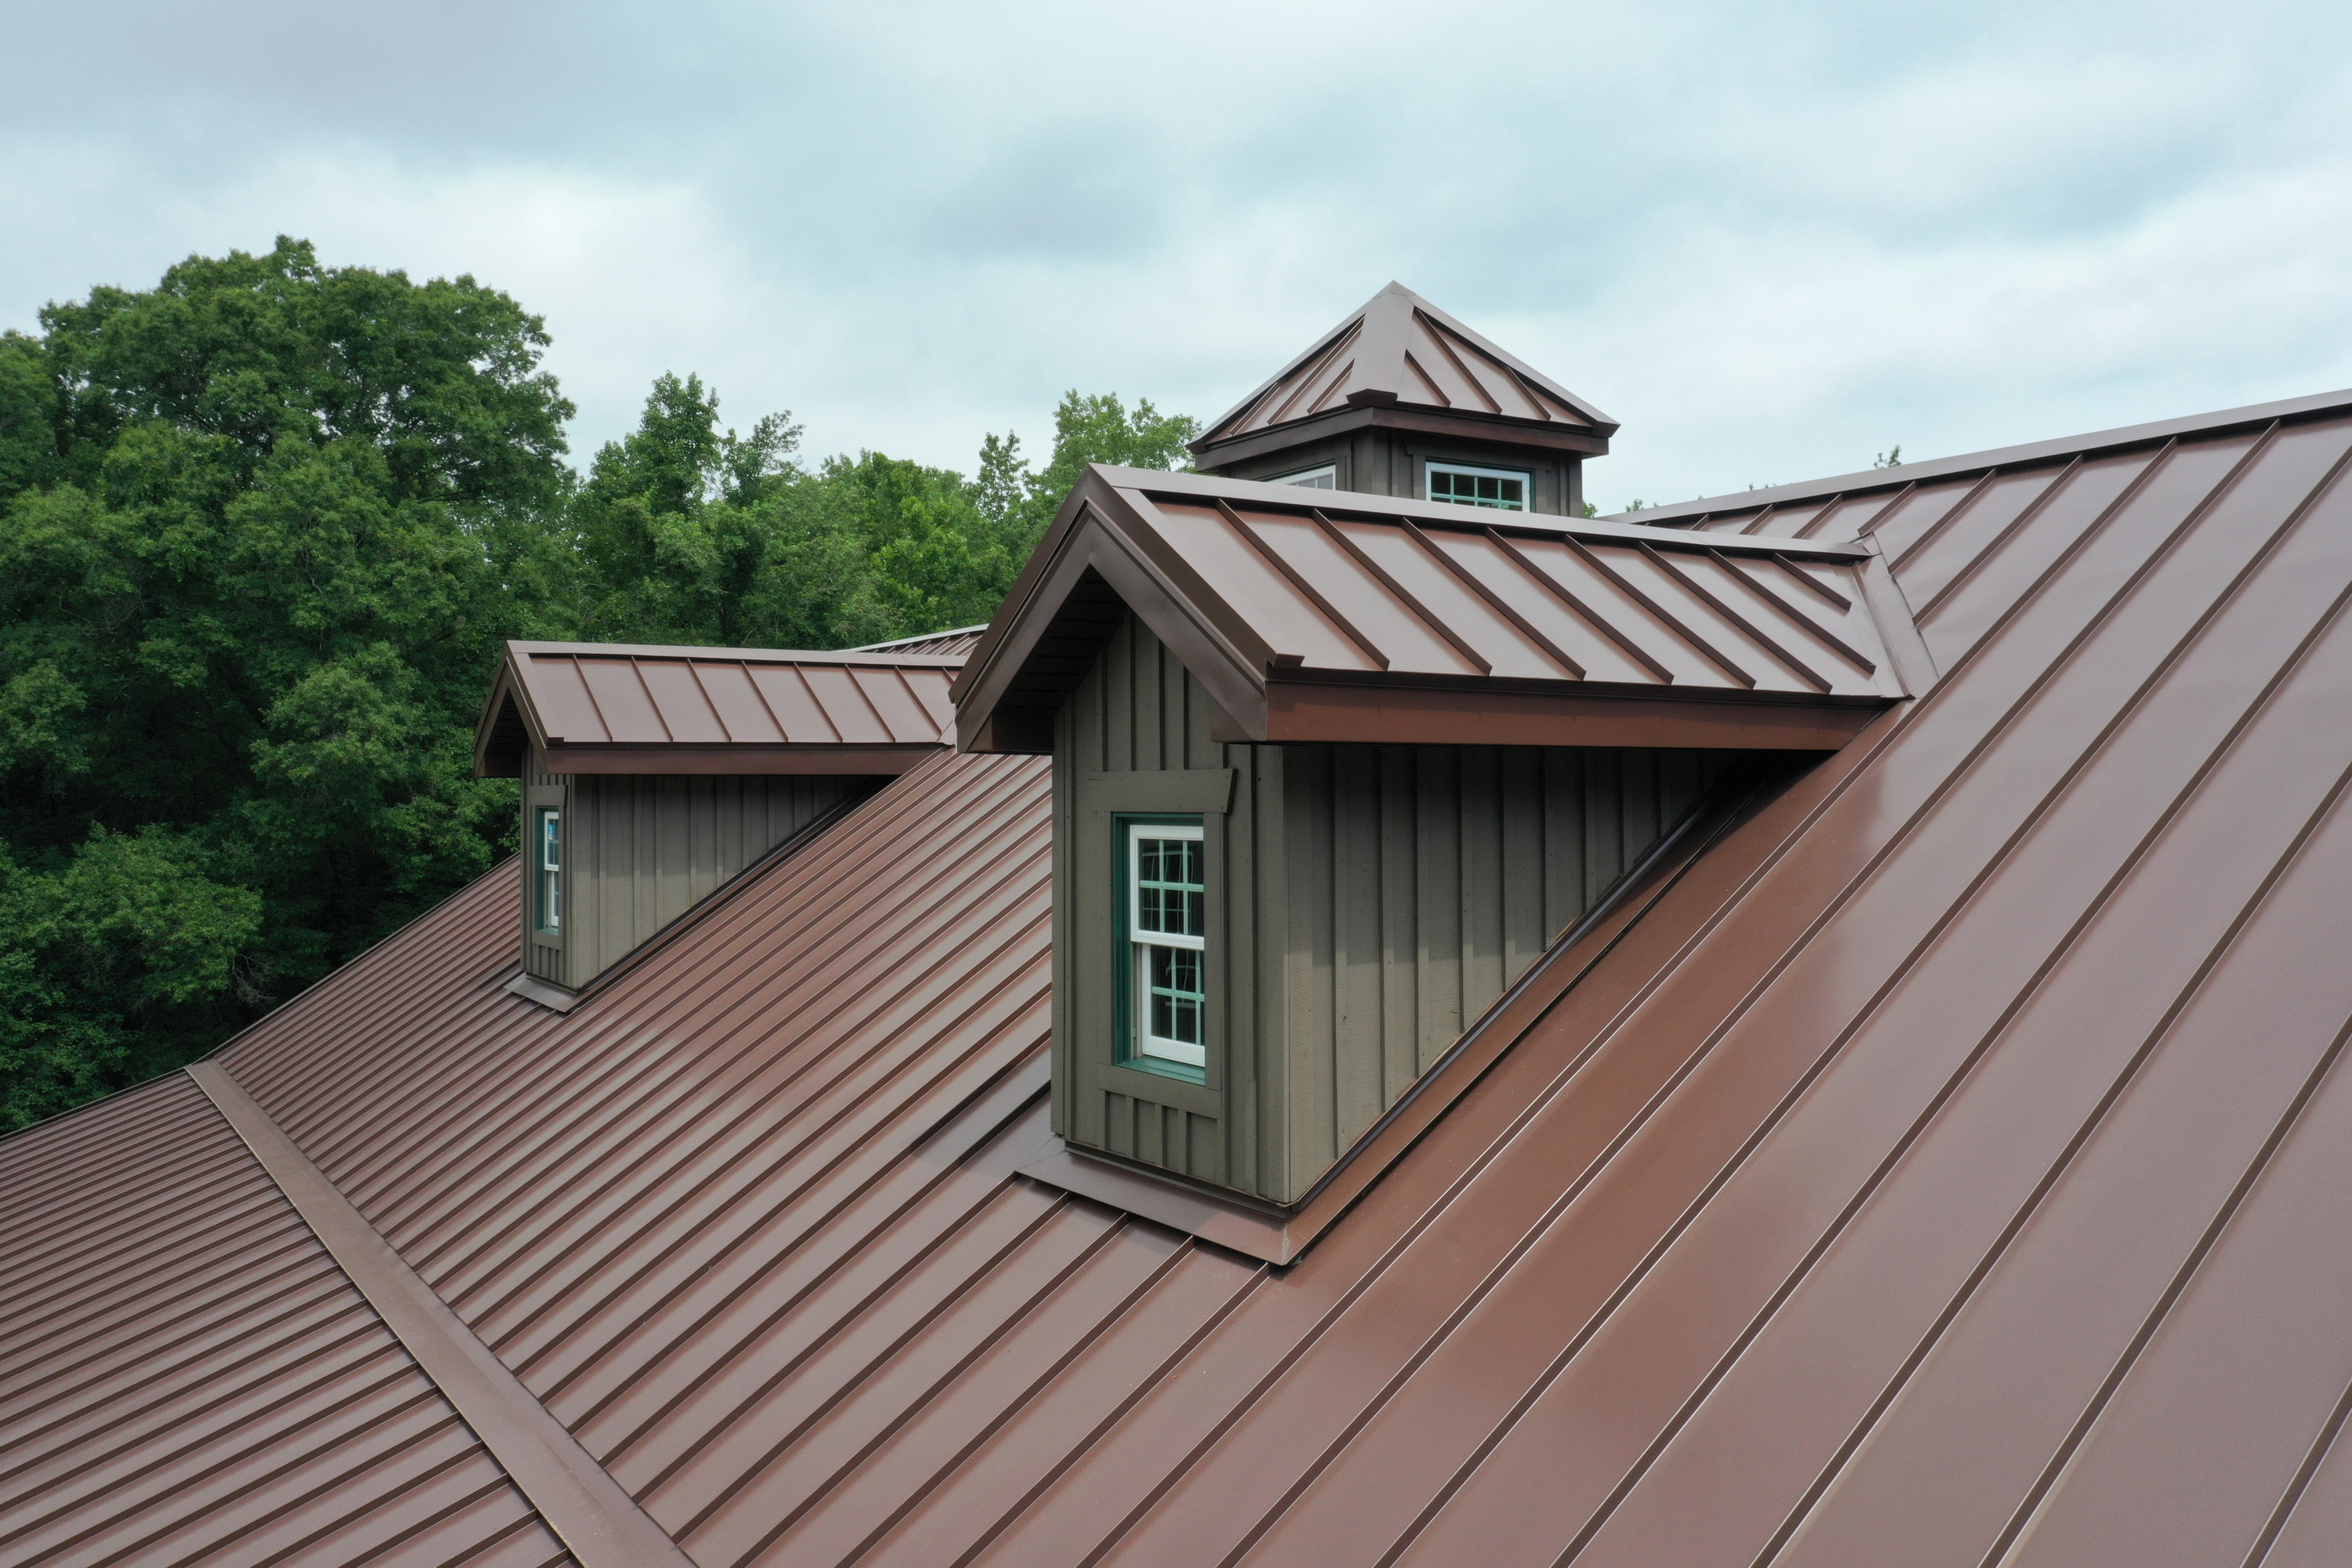 Rust-colored metal roof on a large house